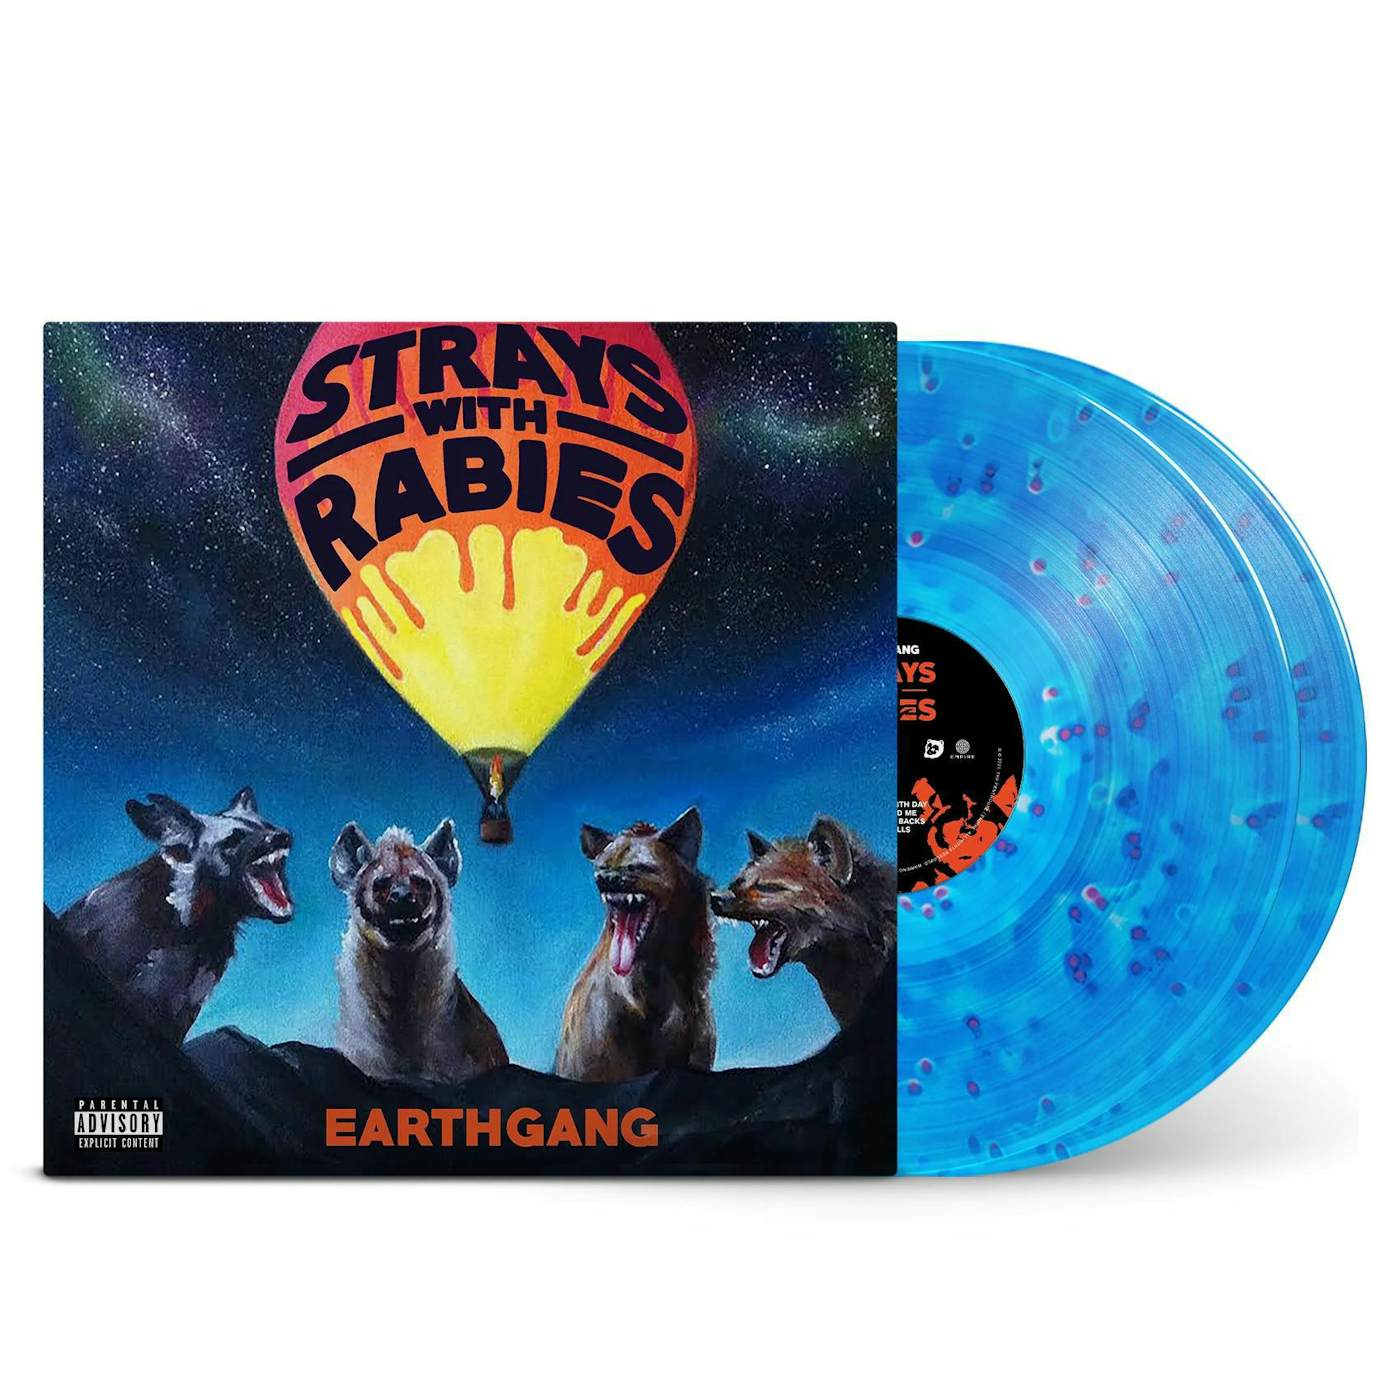 EARTHGANG Strays with Rabies Vinyl Record